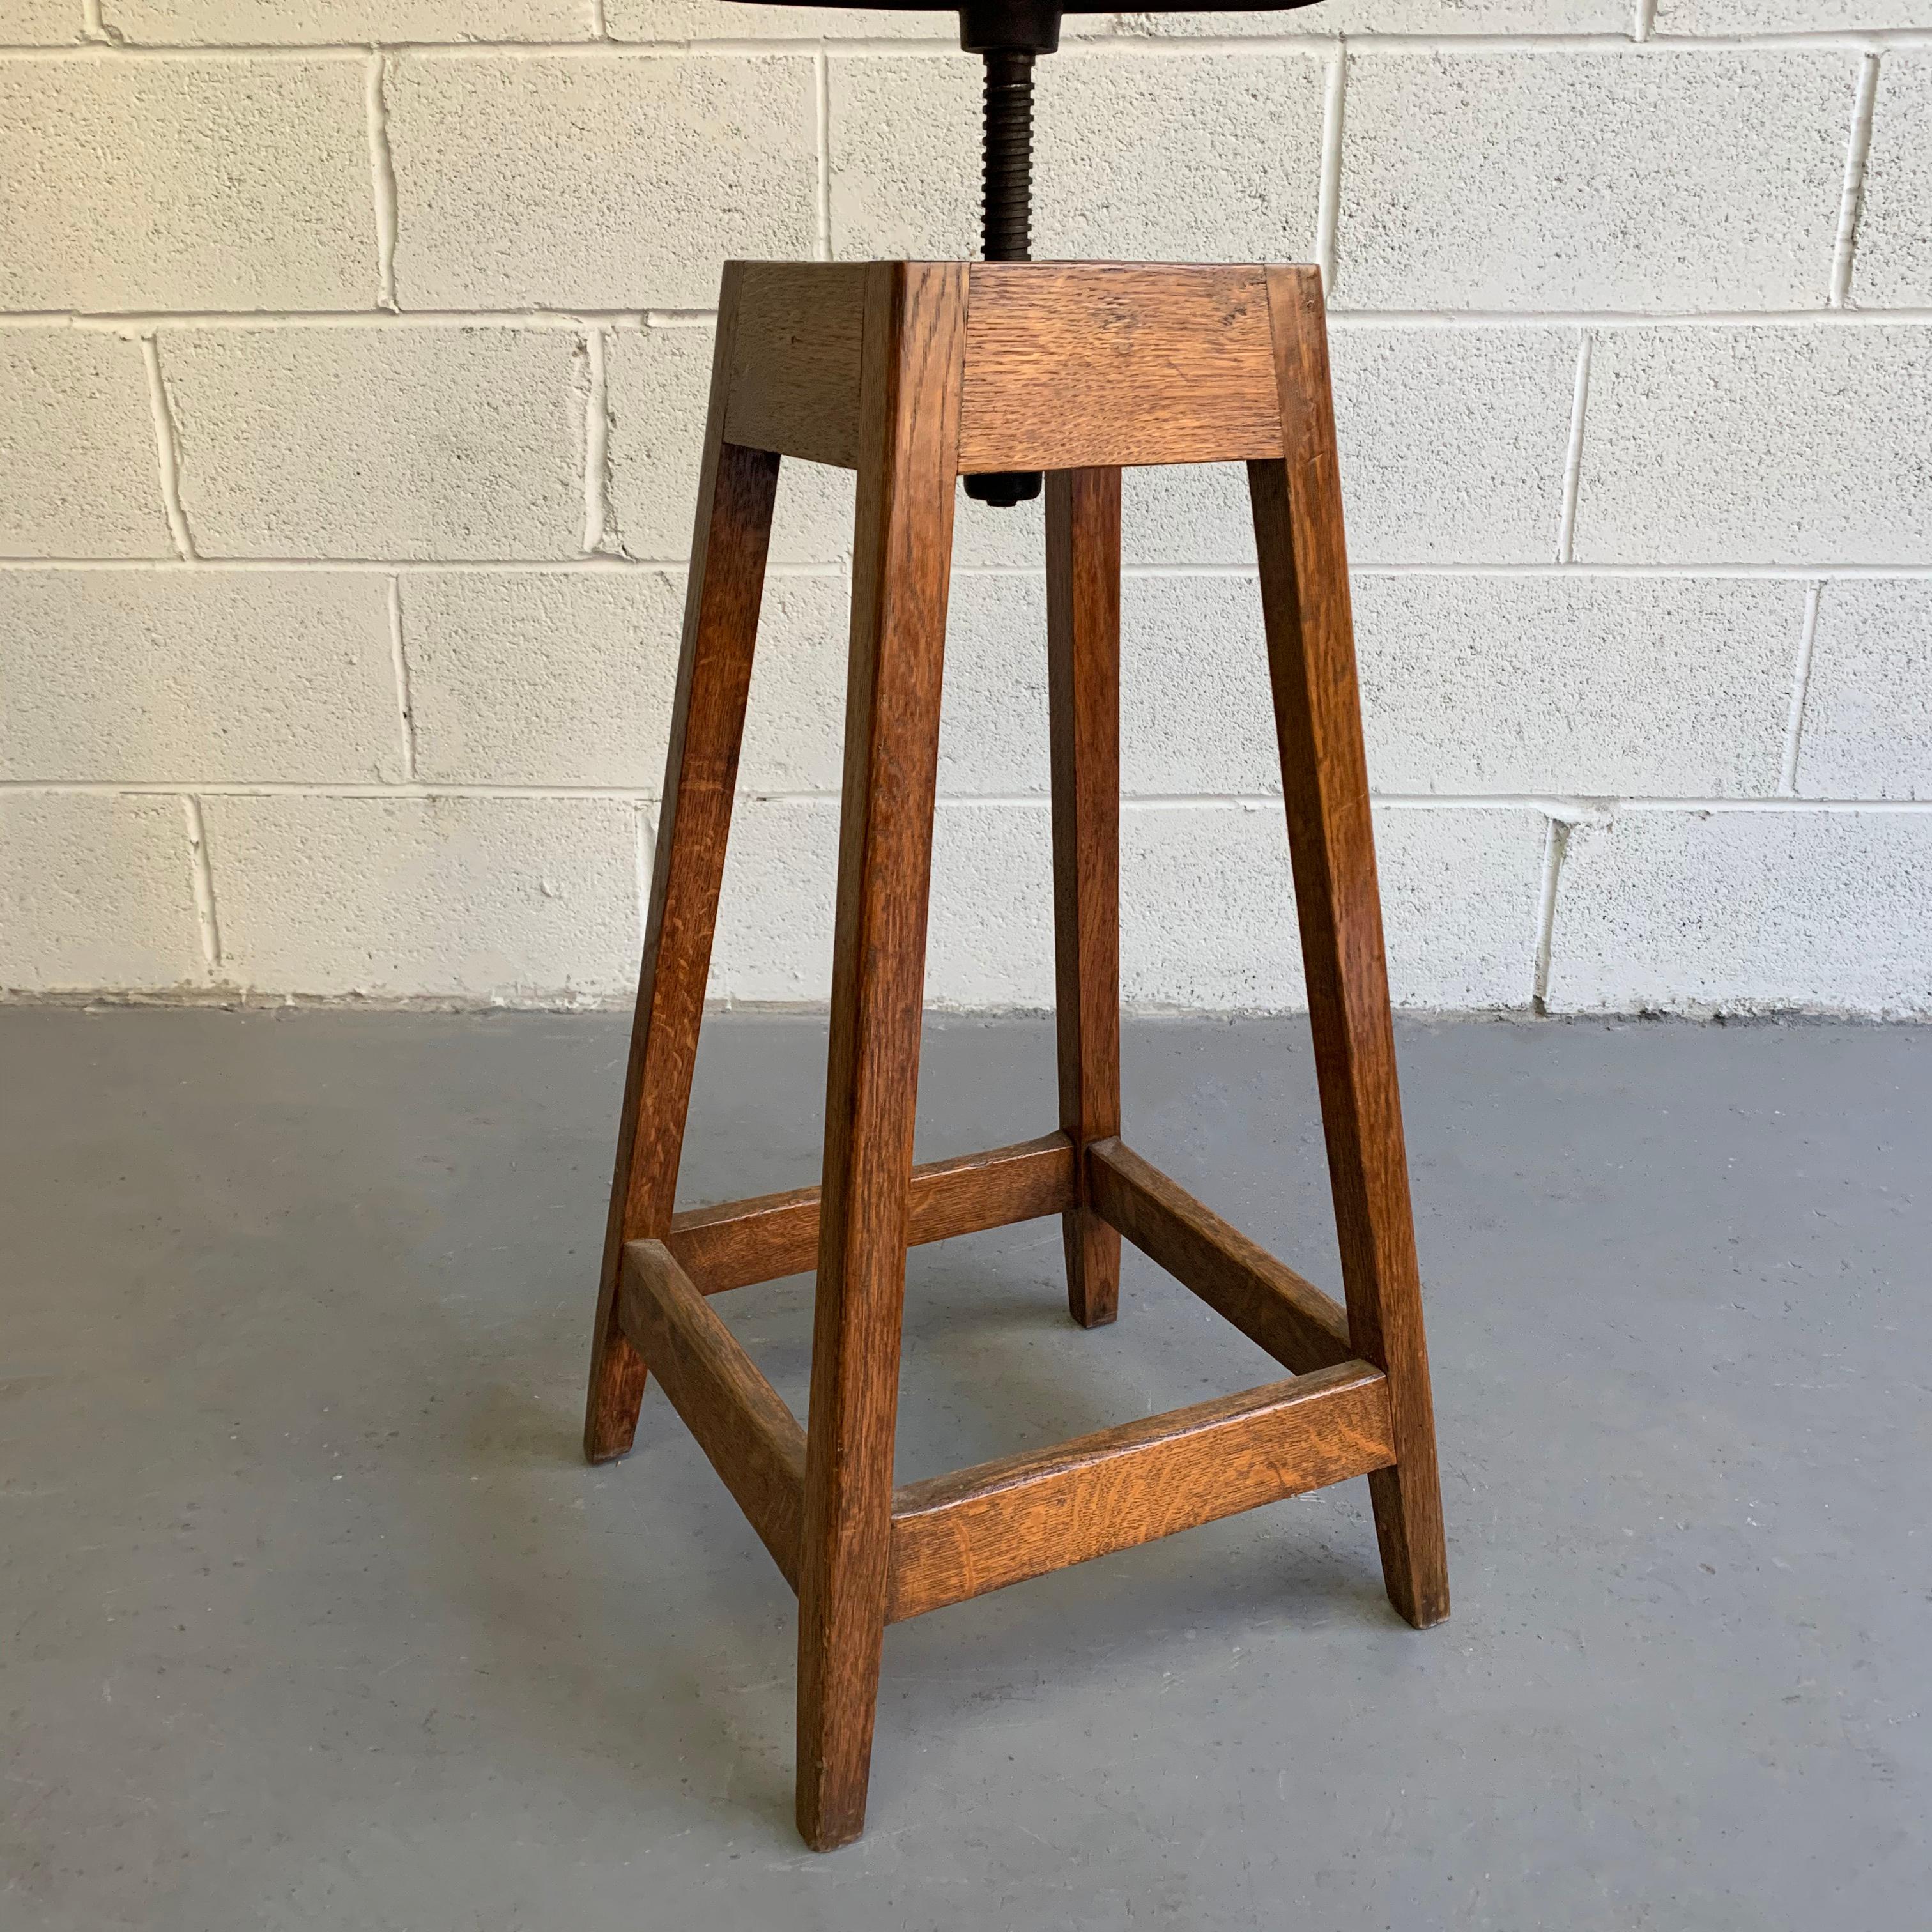 20th Century Industrial Adjustable Oak Shop Stool With Leather Seat For Sale